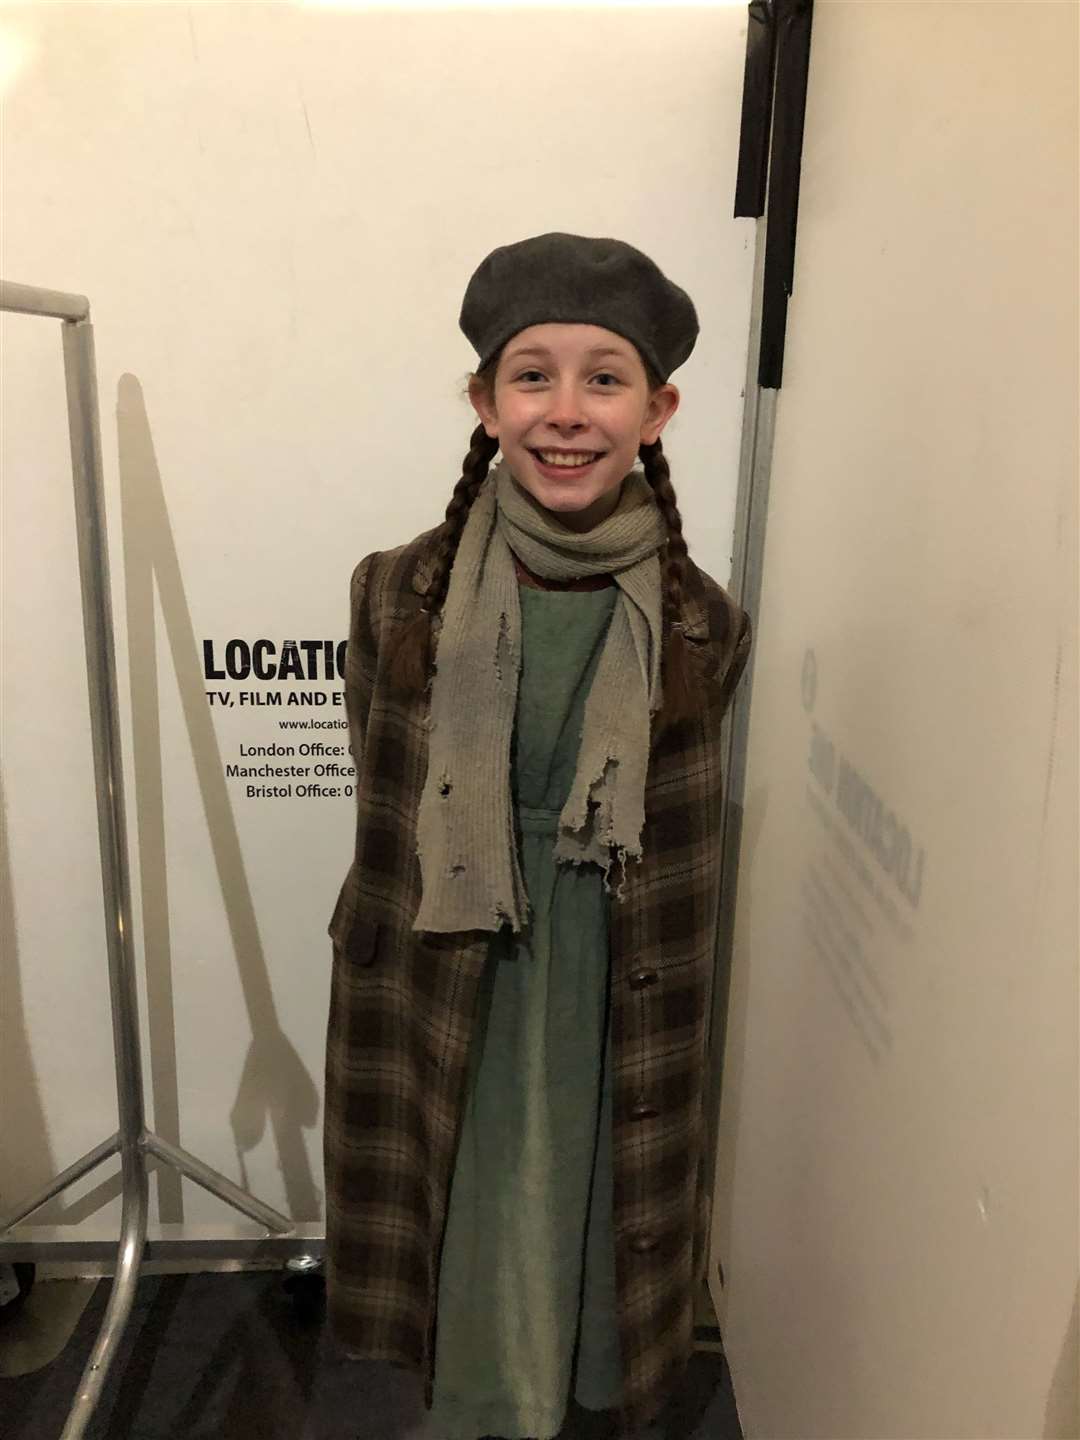 Sophie McDonnell (12), from Banff Academy, was on set as an extra.